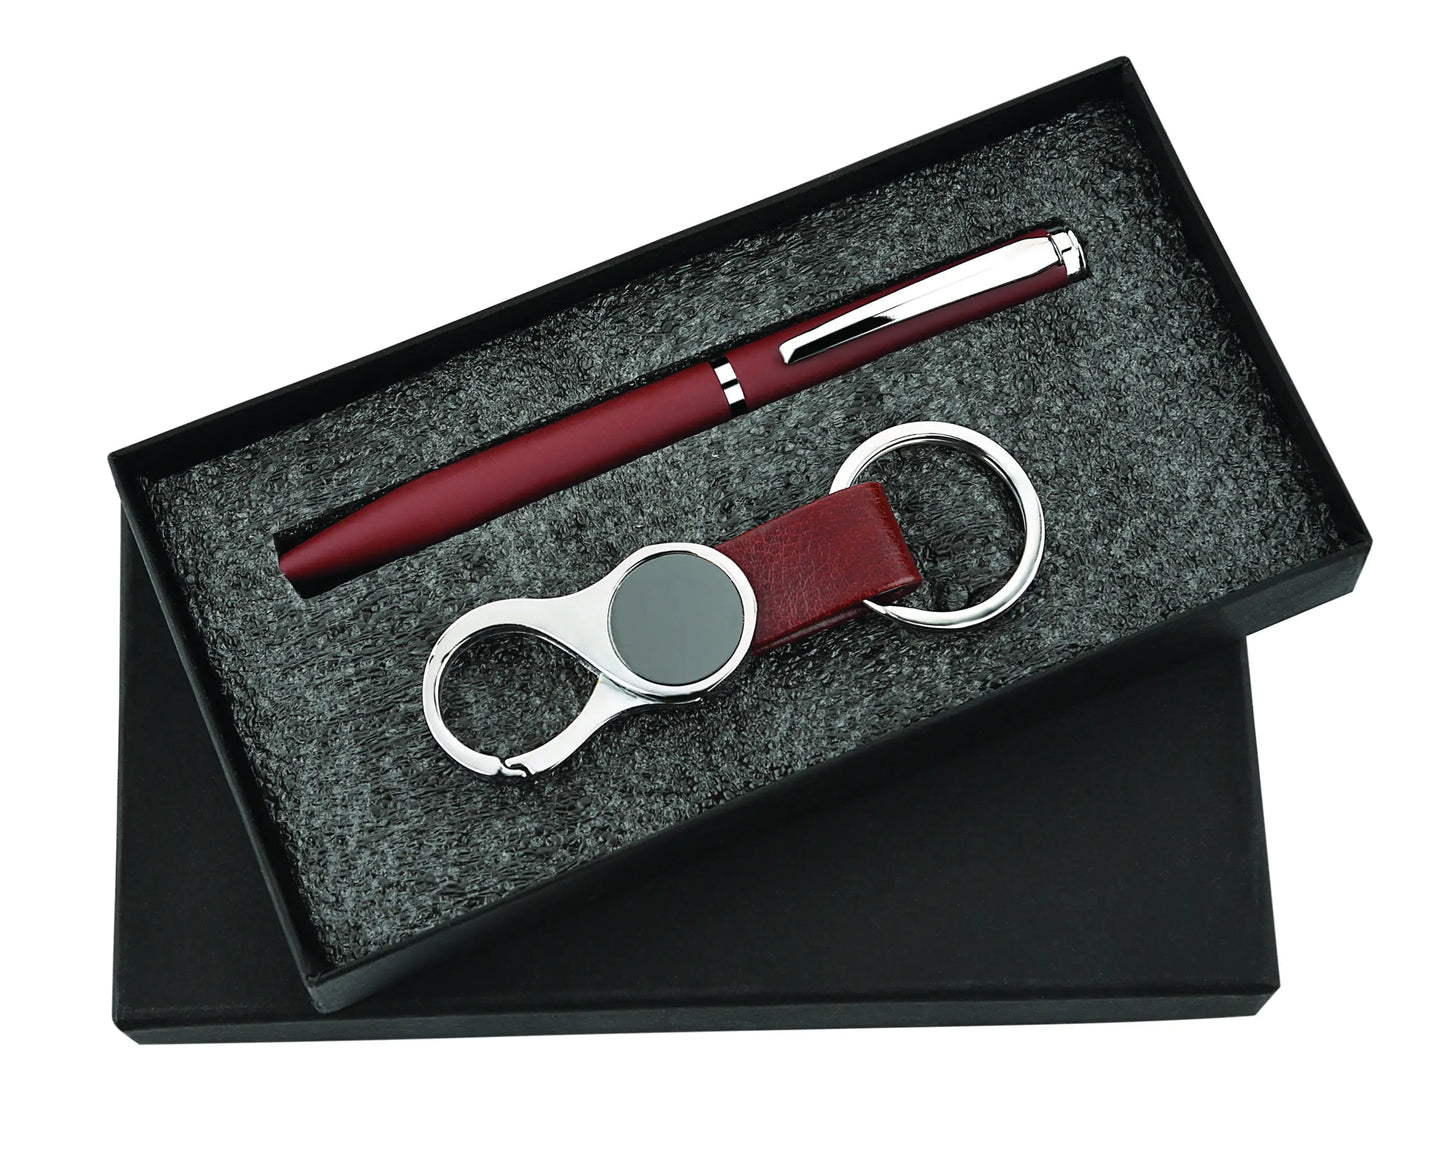 Pen and Keychain 2in1 Combo Gift Set - For Employee Joining Kit, Corporate, Client or Dealer Gifting, Promotional Freebie JKSR109